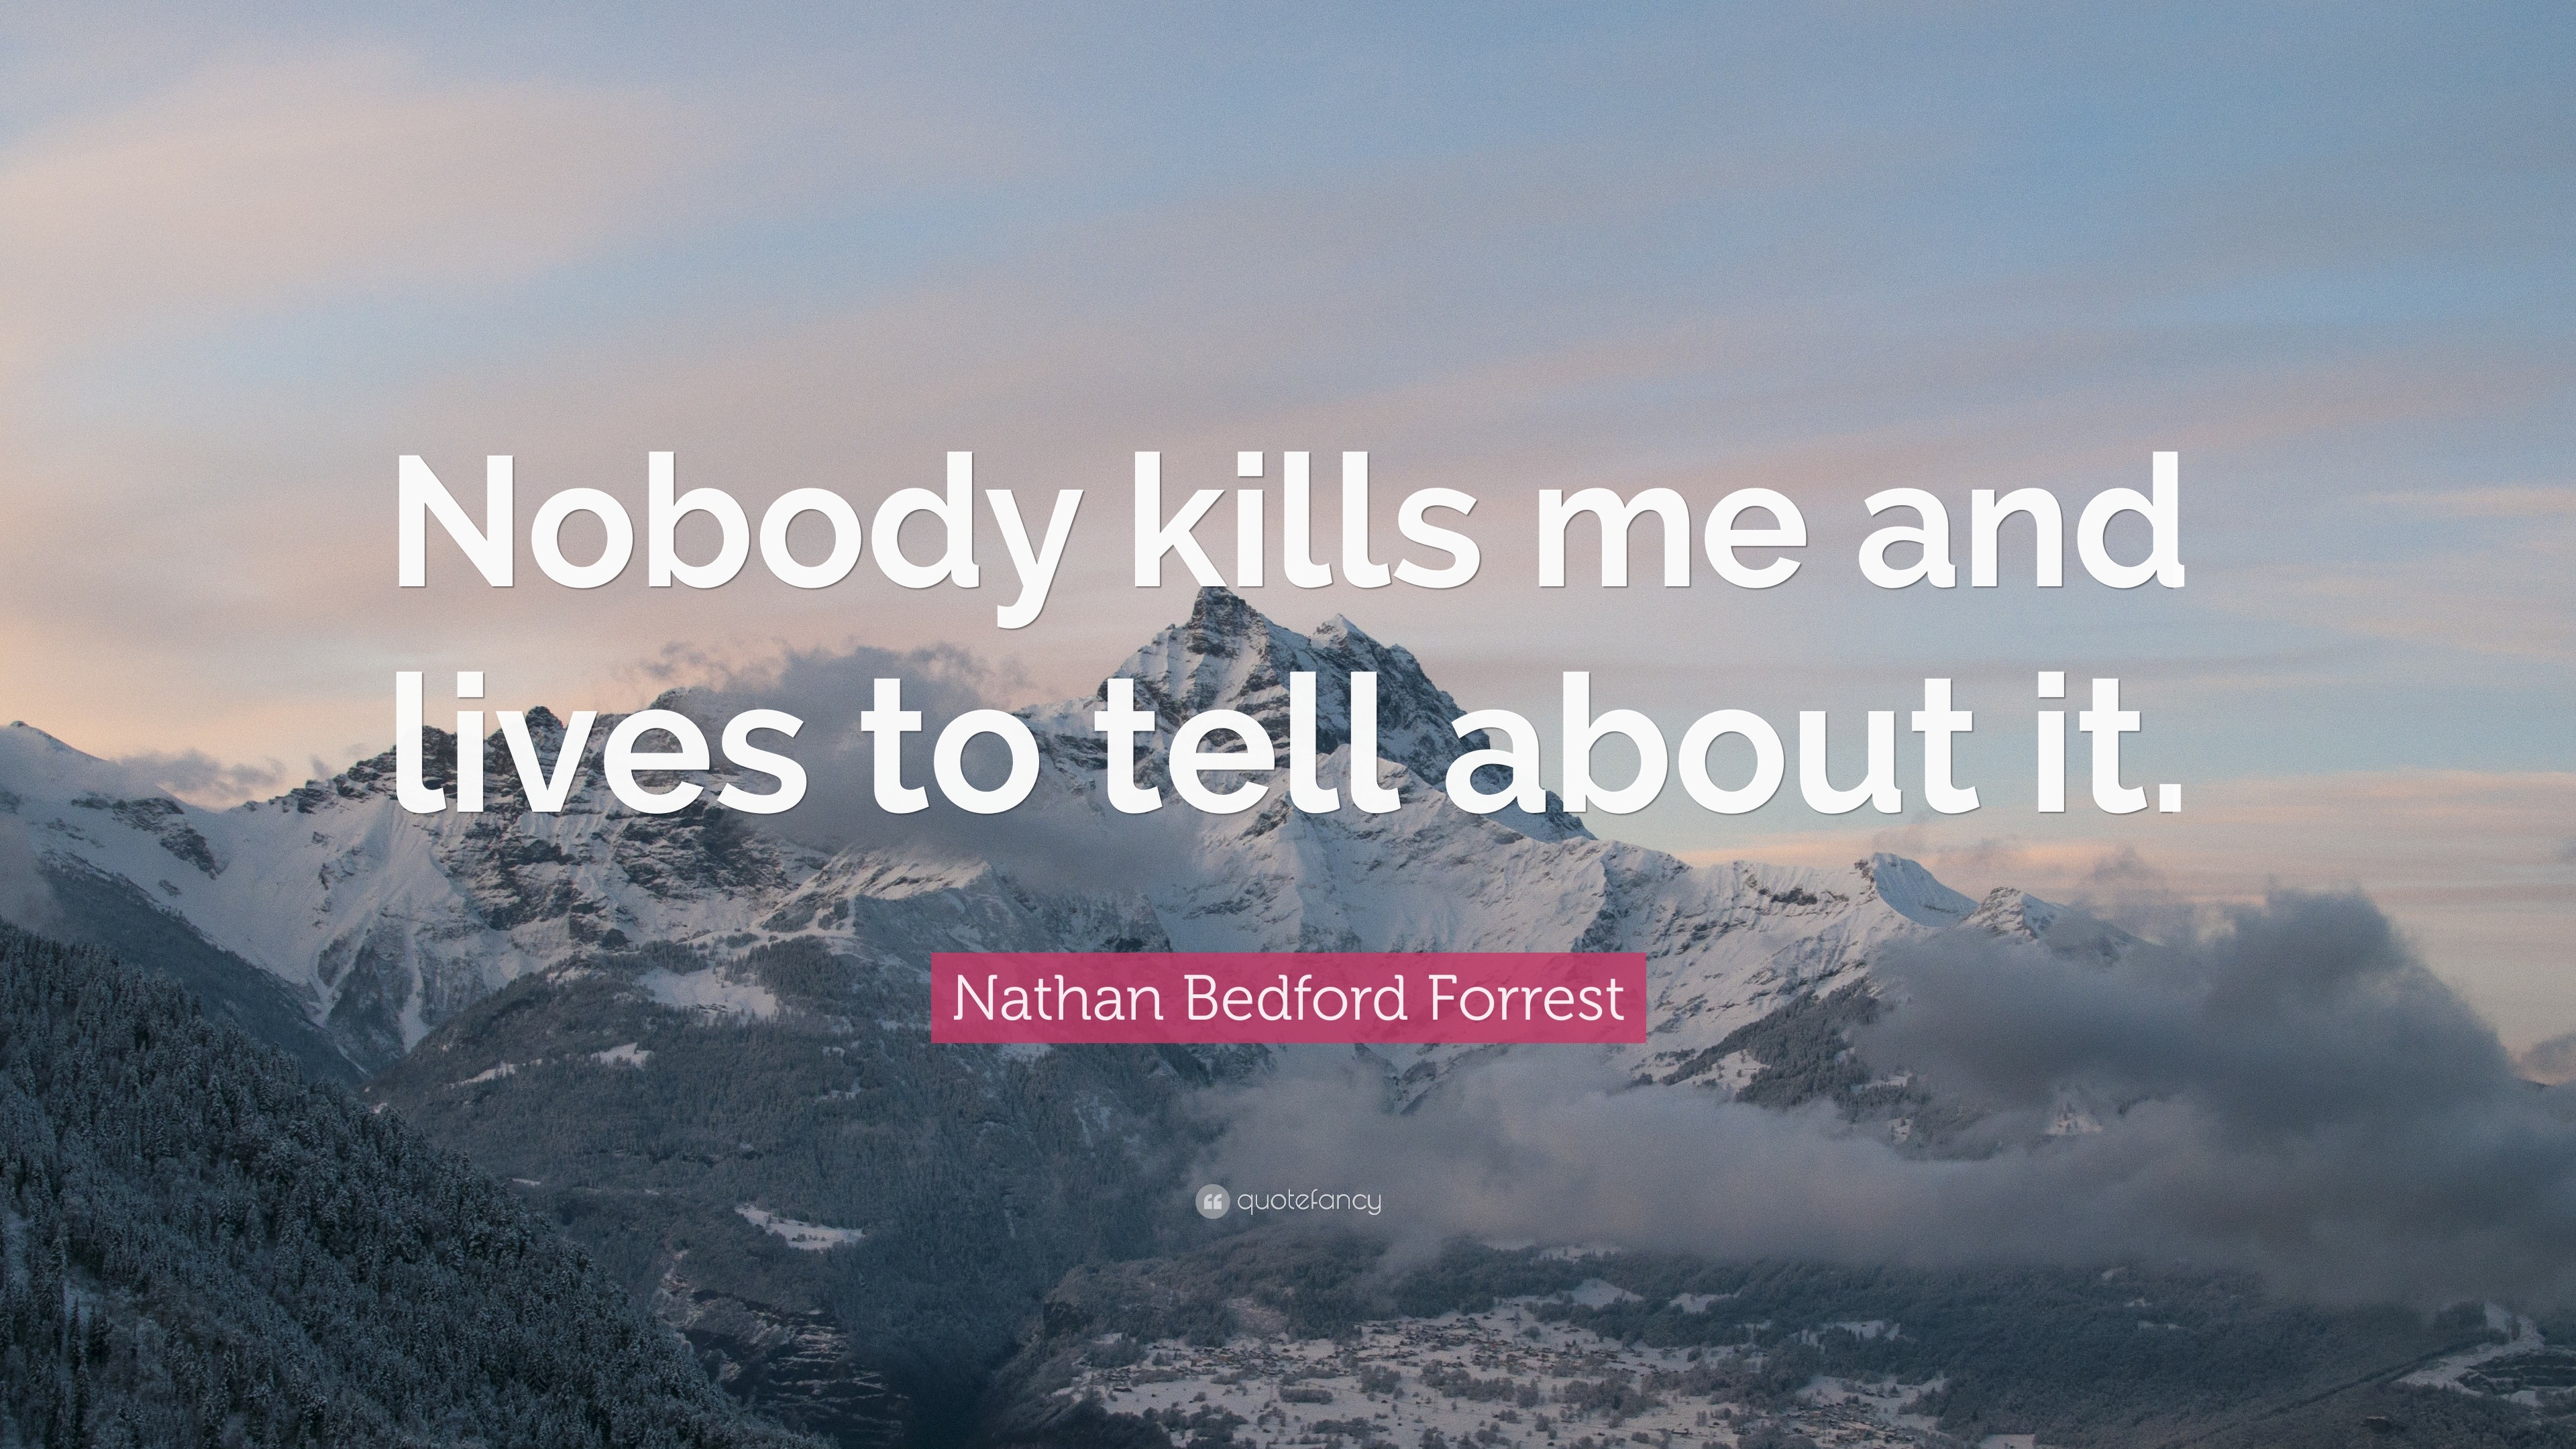 Nathan Bedford Forrest Quote: “Nobody kills me and lives to tell about it.”